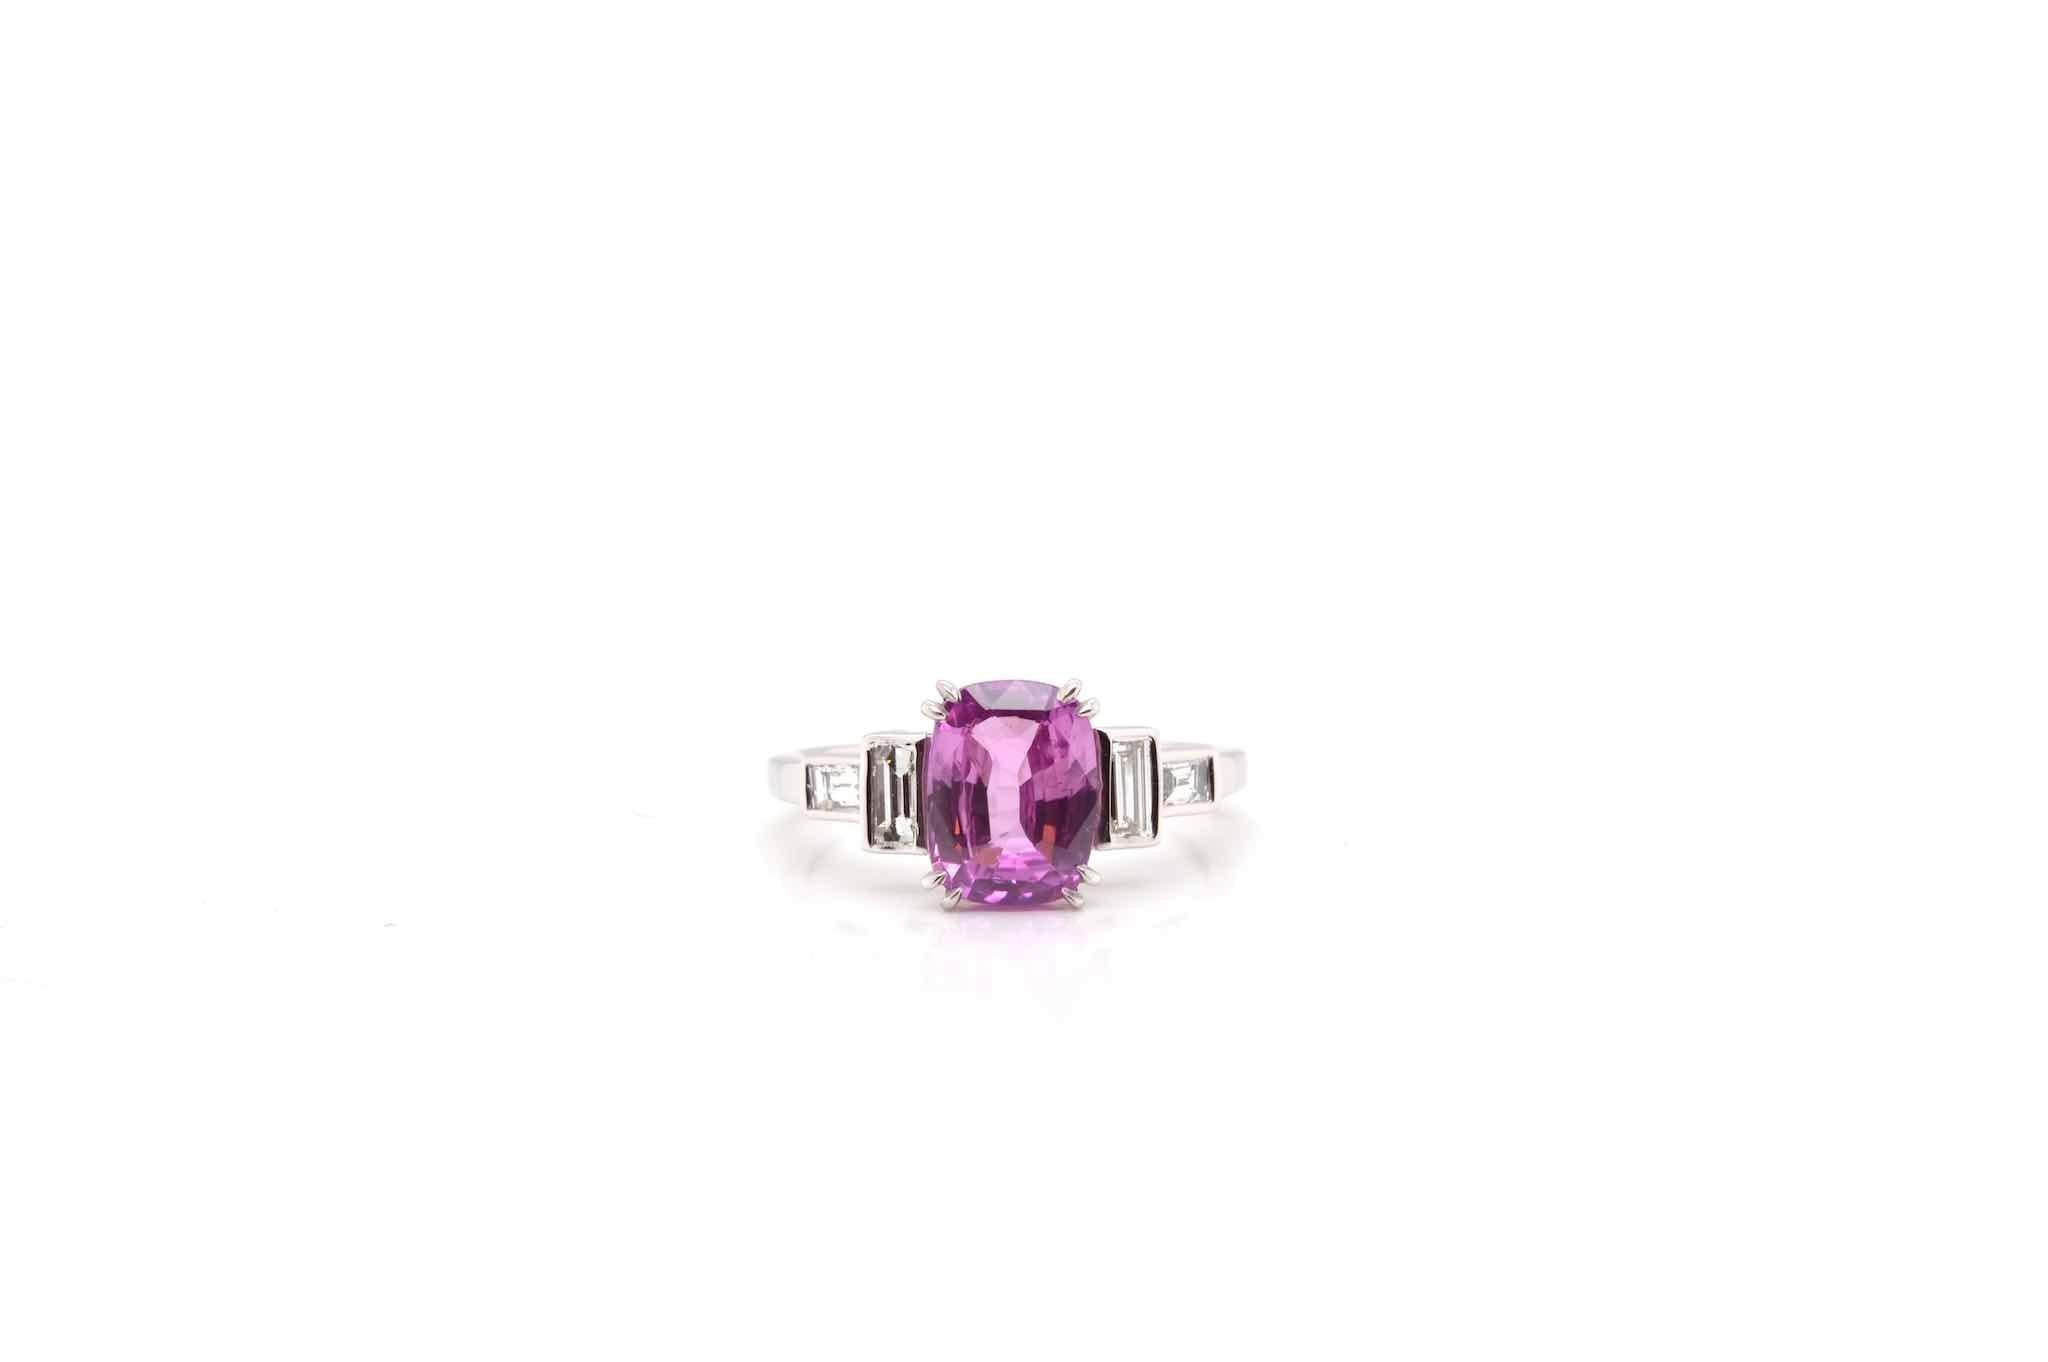 Stones: 2.50 carats pink sapphire and baguette diamonds
for a total carat weight of 0.33 carats.
Material: 18k white gold
Weight: 3.7g
Size: (free sizing)
Certificate
Ref. : 24762 / 23857